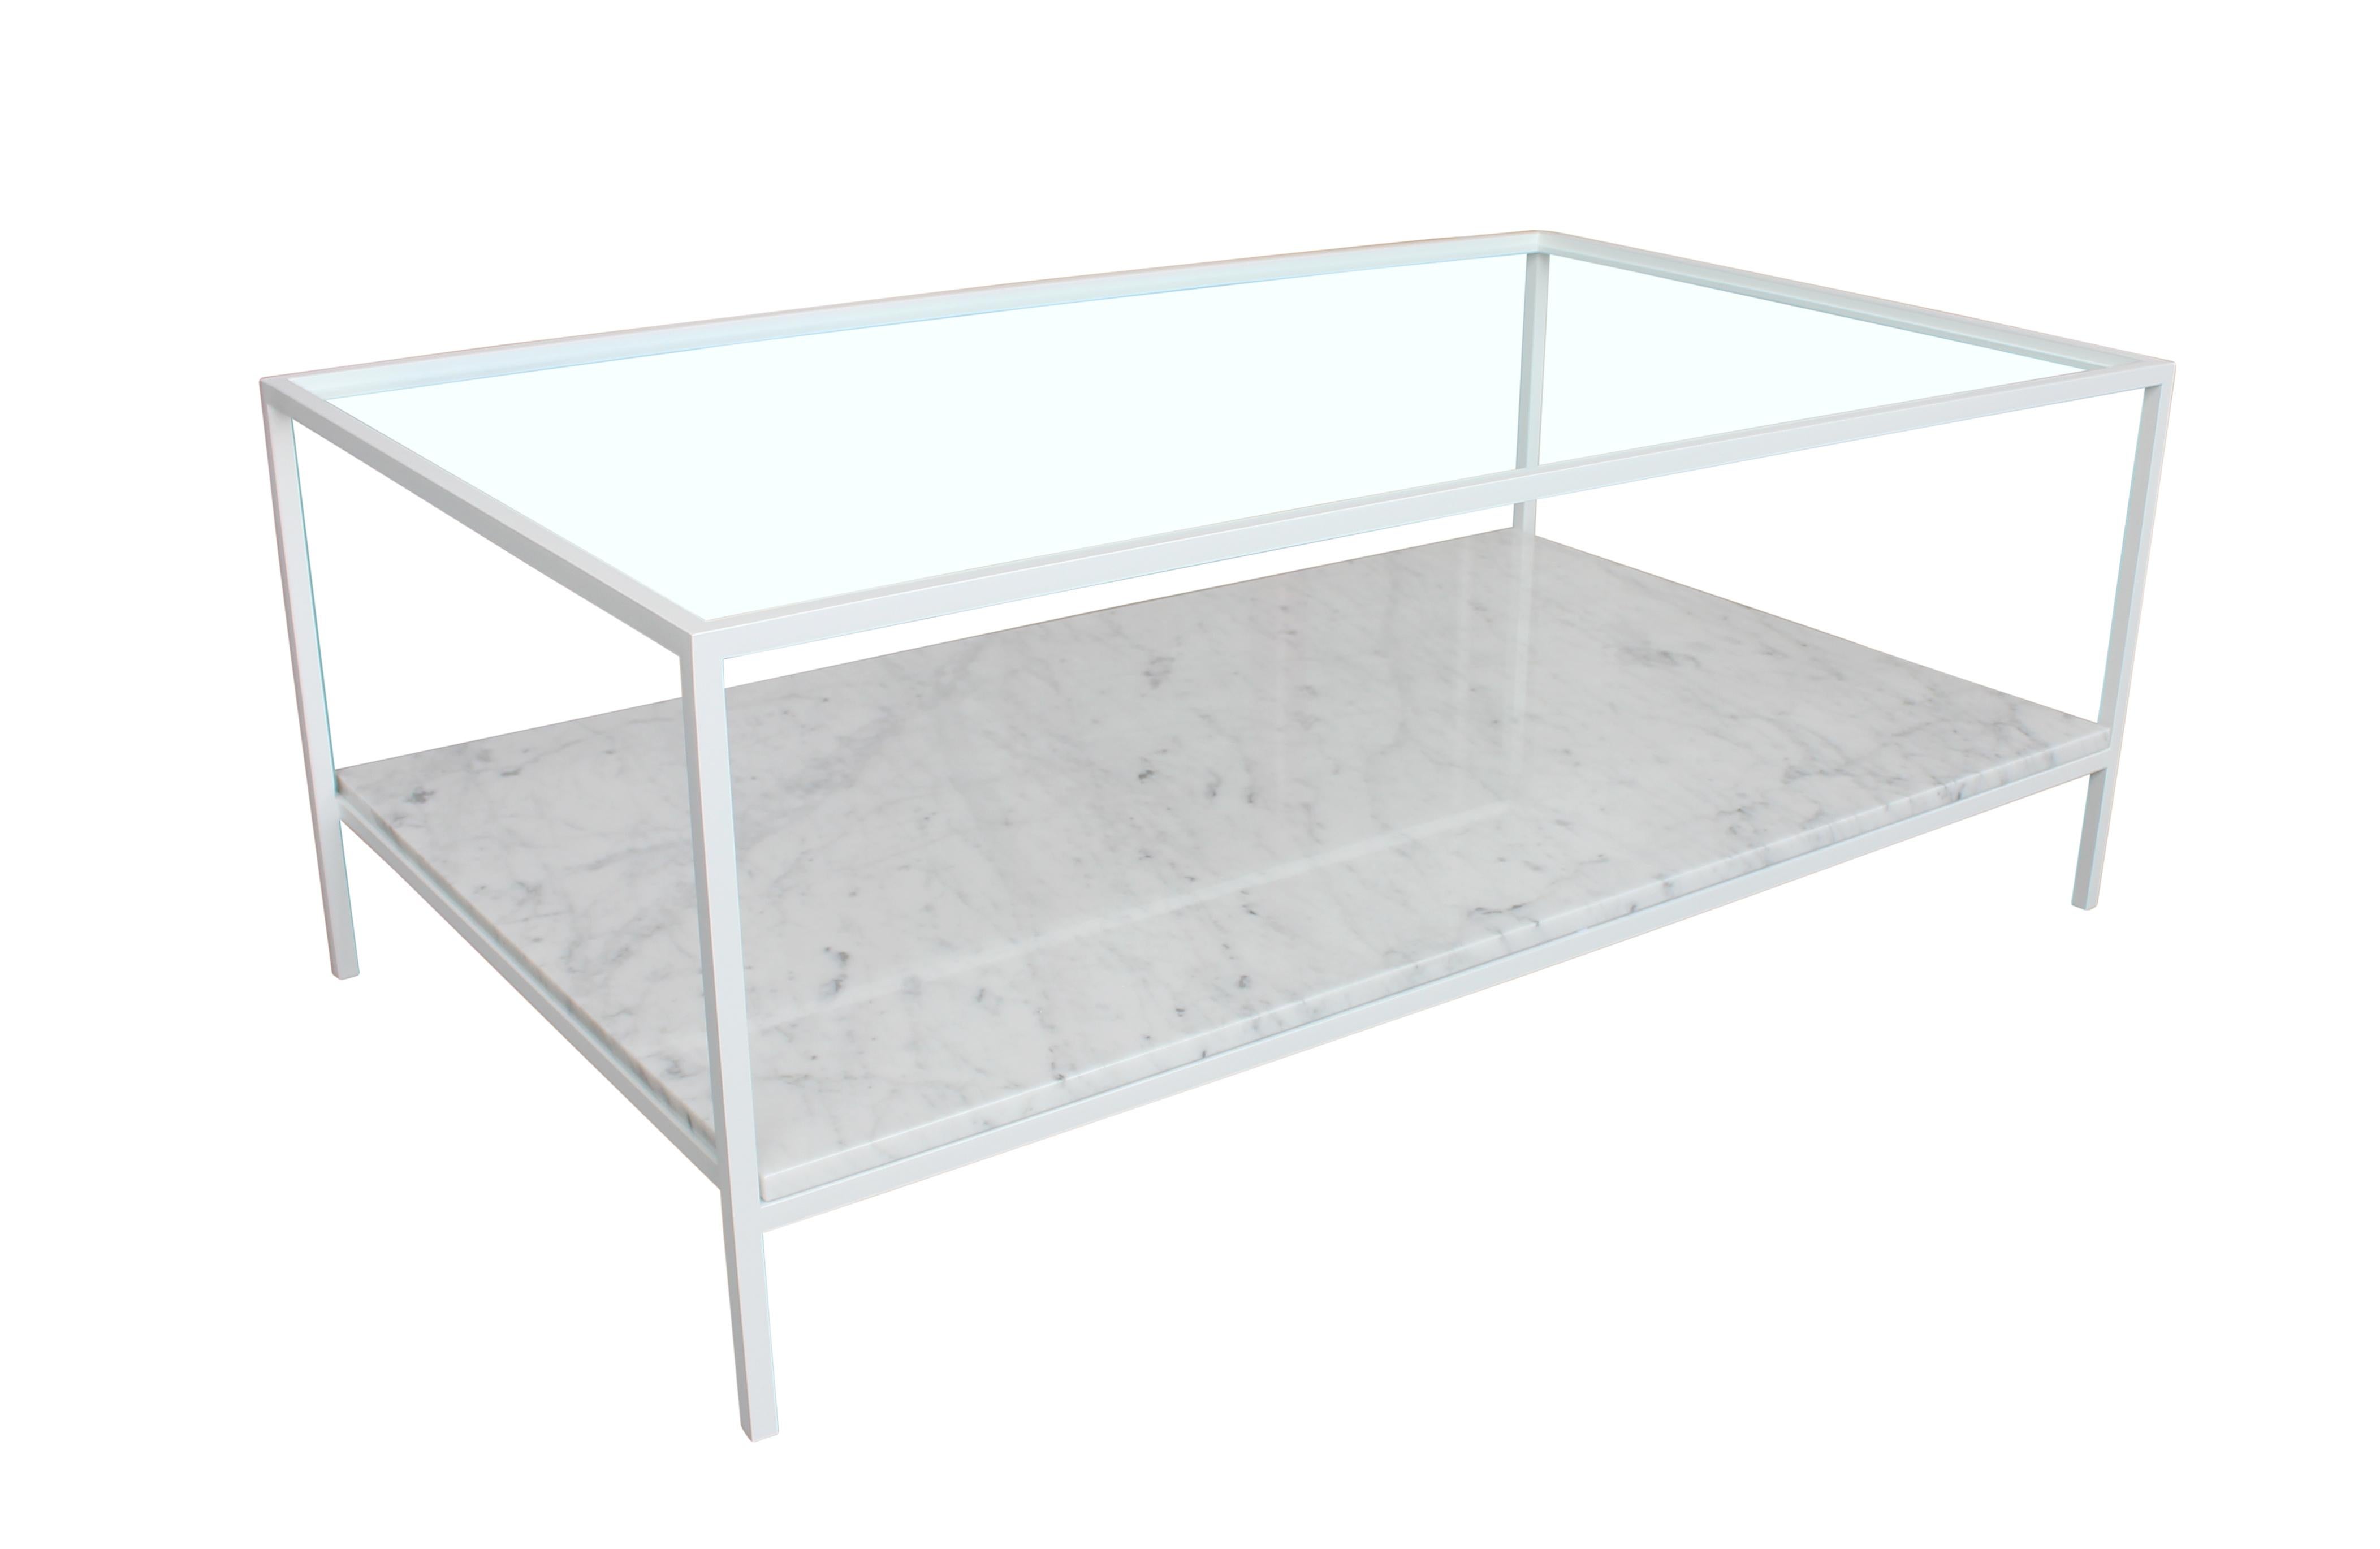 Steel frame cocktail table in matte white enamel finish with Carrara marble shelf and glass top. In stock and ready to ship, can also be custom made in any dimensions.